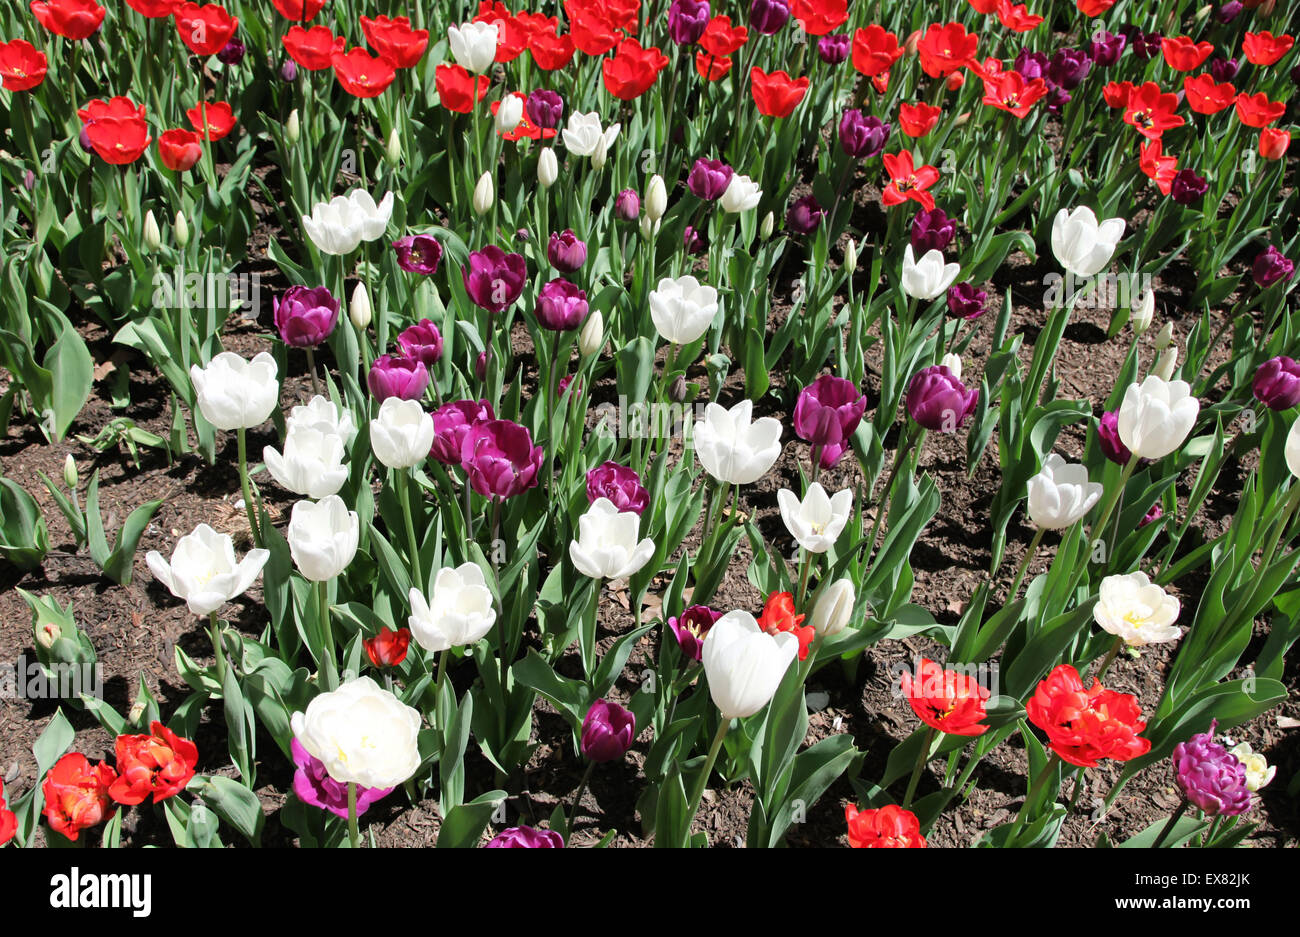 It's a photo of tulips in white purple and red color in a garden or park. Stock Photo